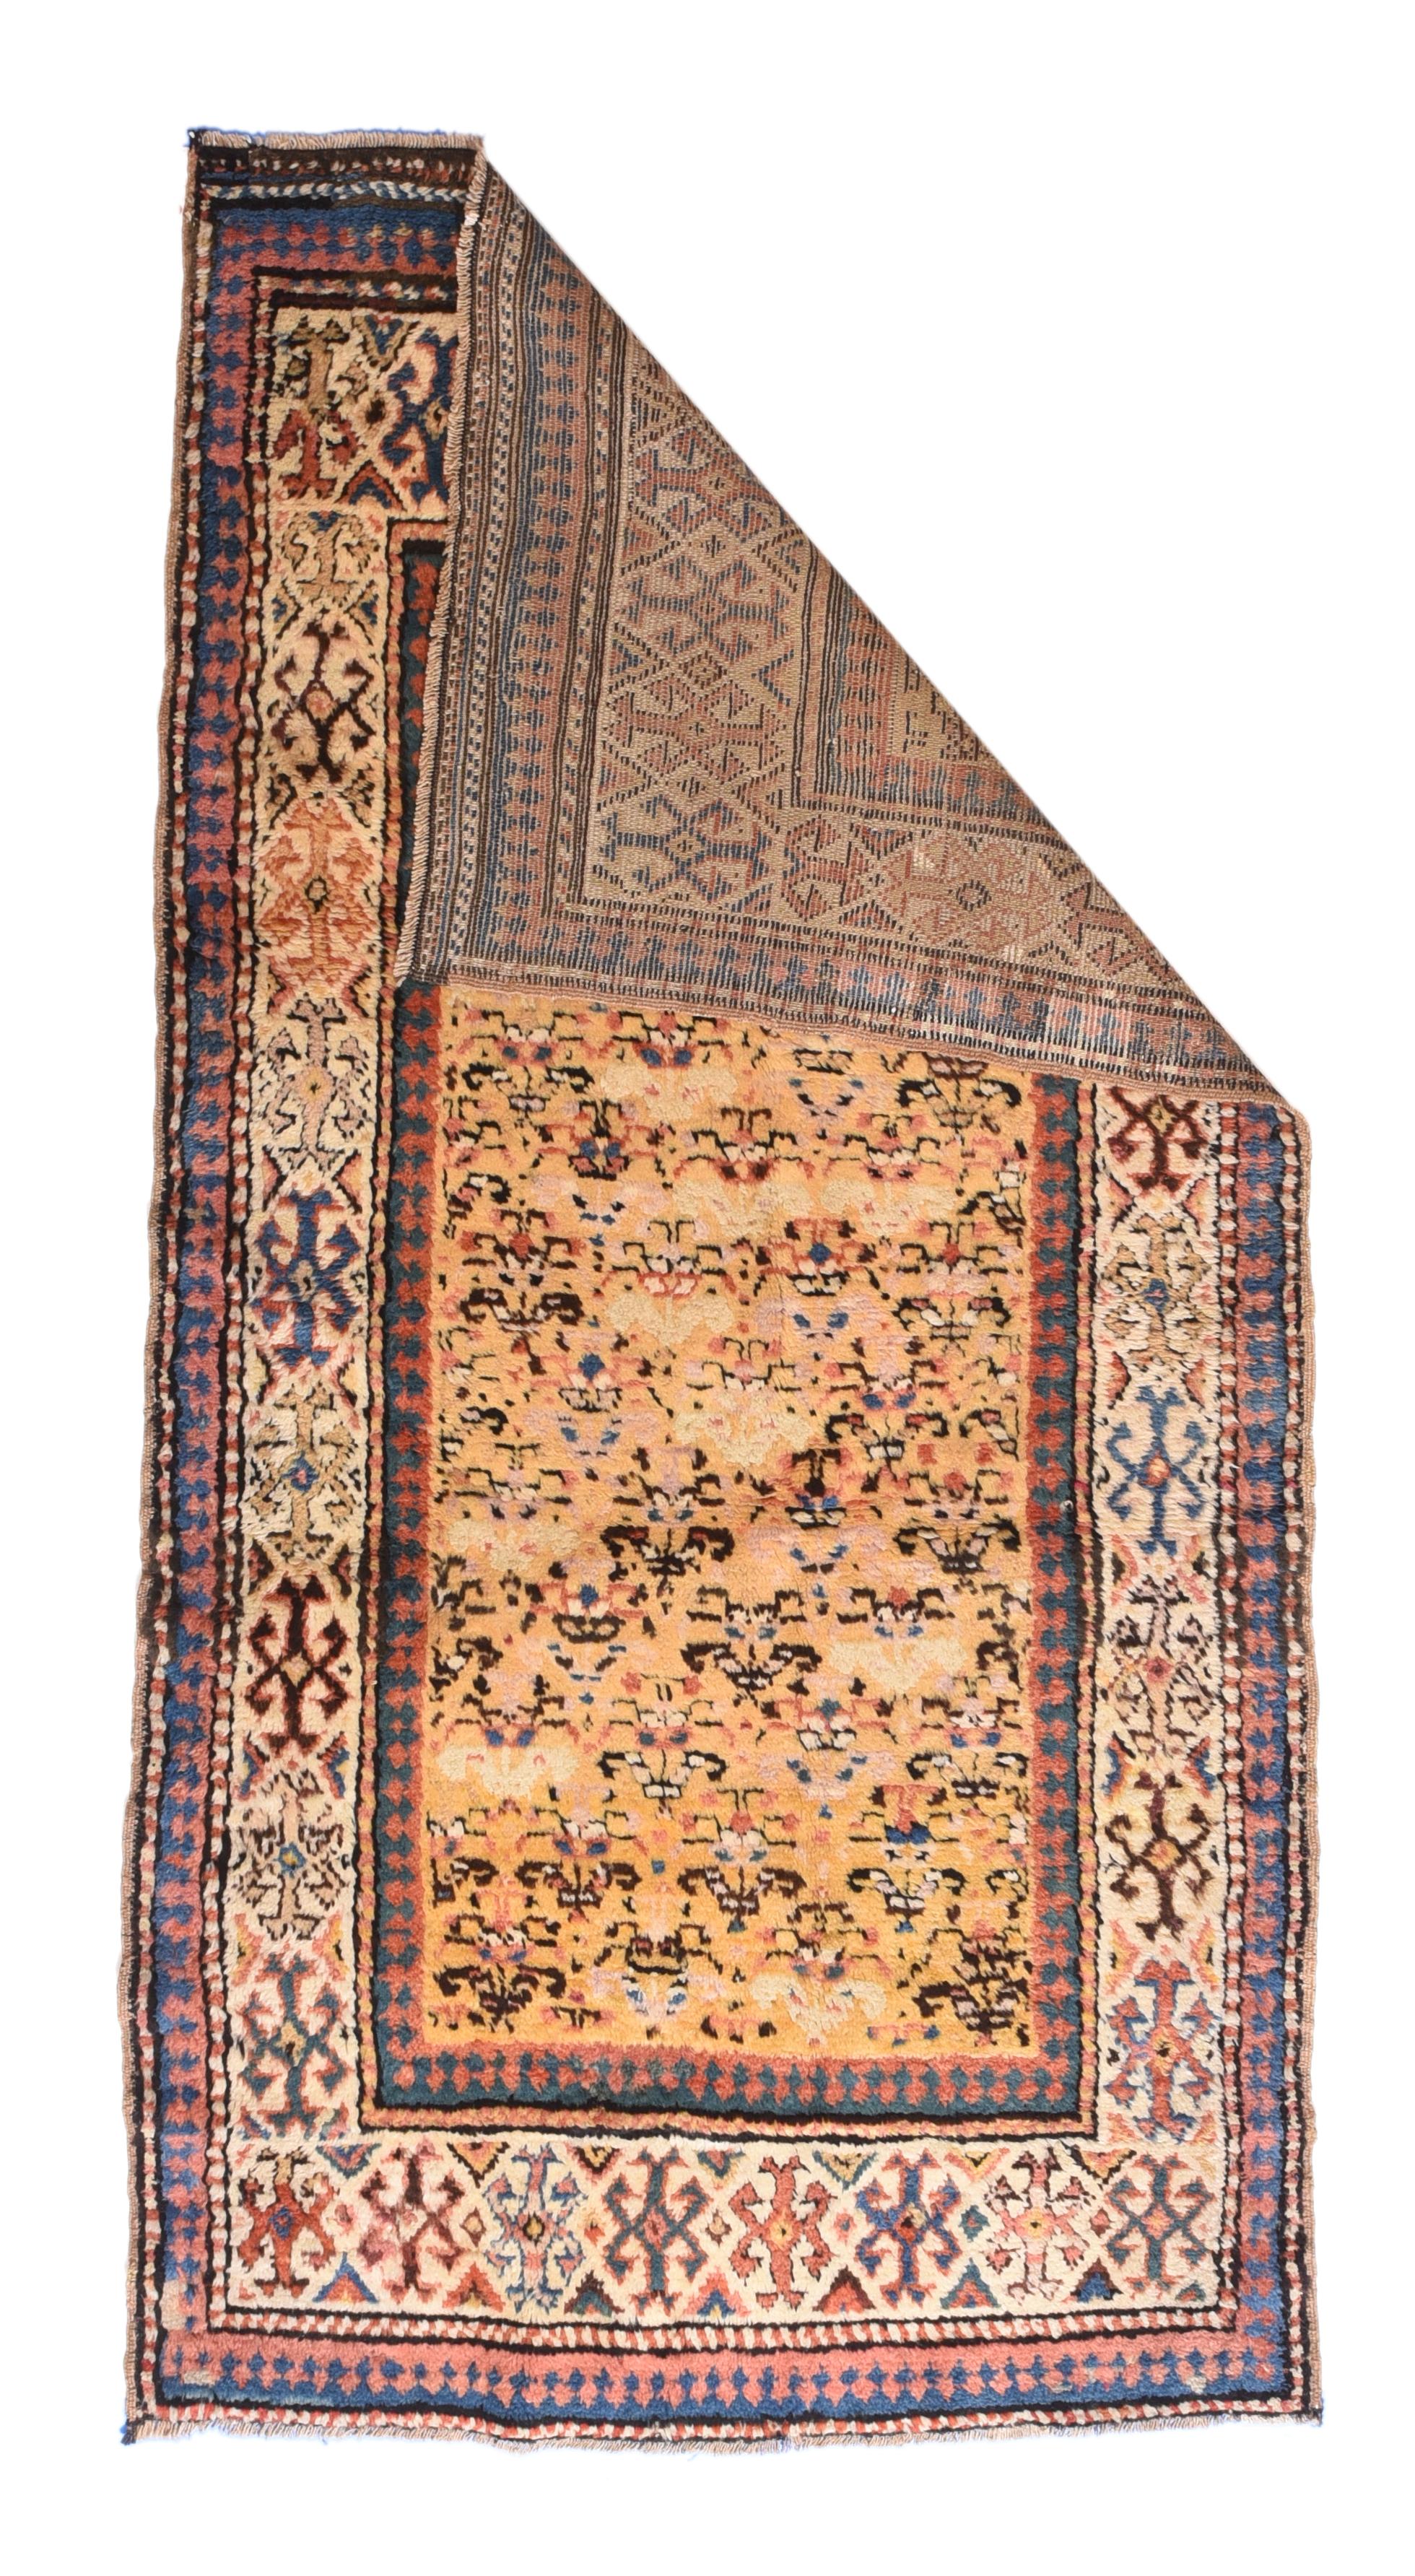 Other Antique Persian Kurdish Area Rug For Sale